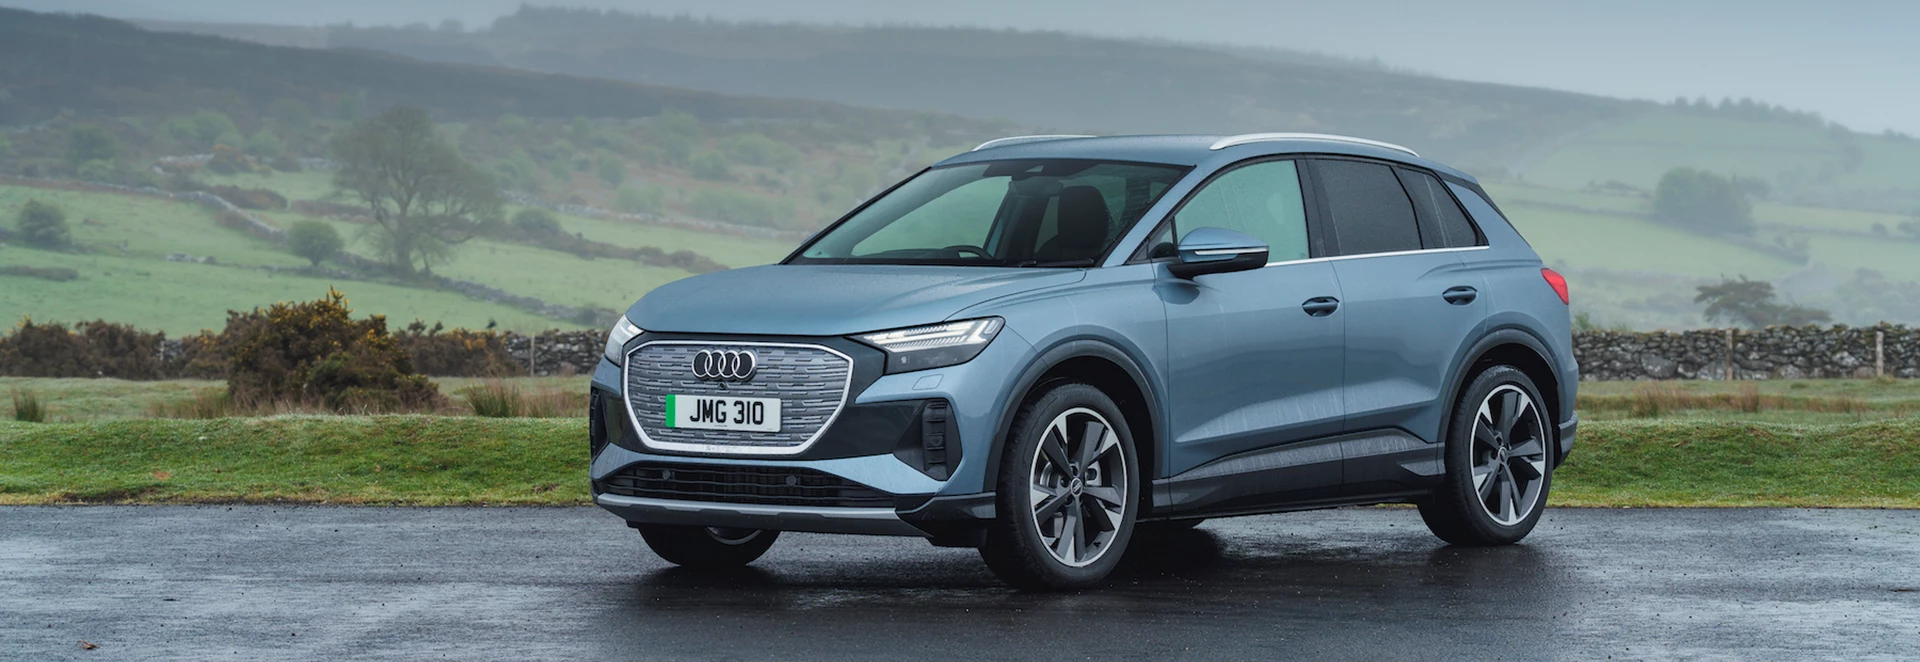 5 things you need to know about the new Audi Q4 e-tron 